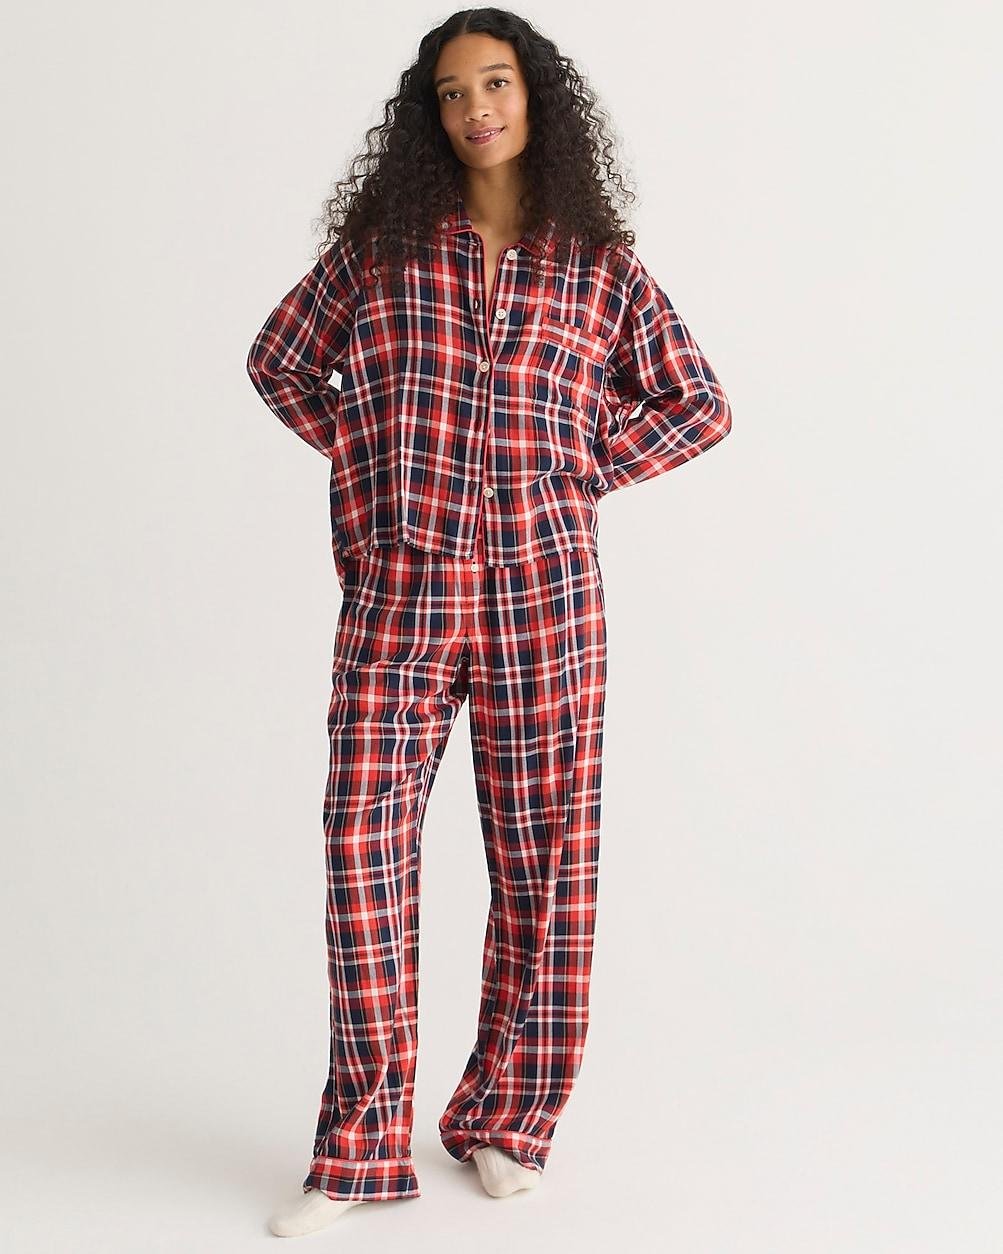 Flannel long-sleeve cropped pajama pant set in plaid by J.CREW